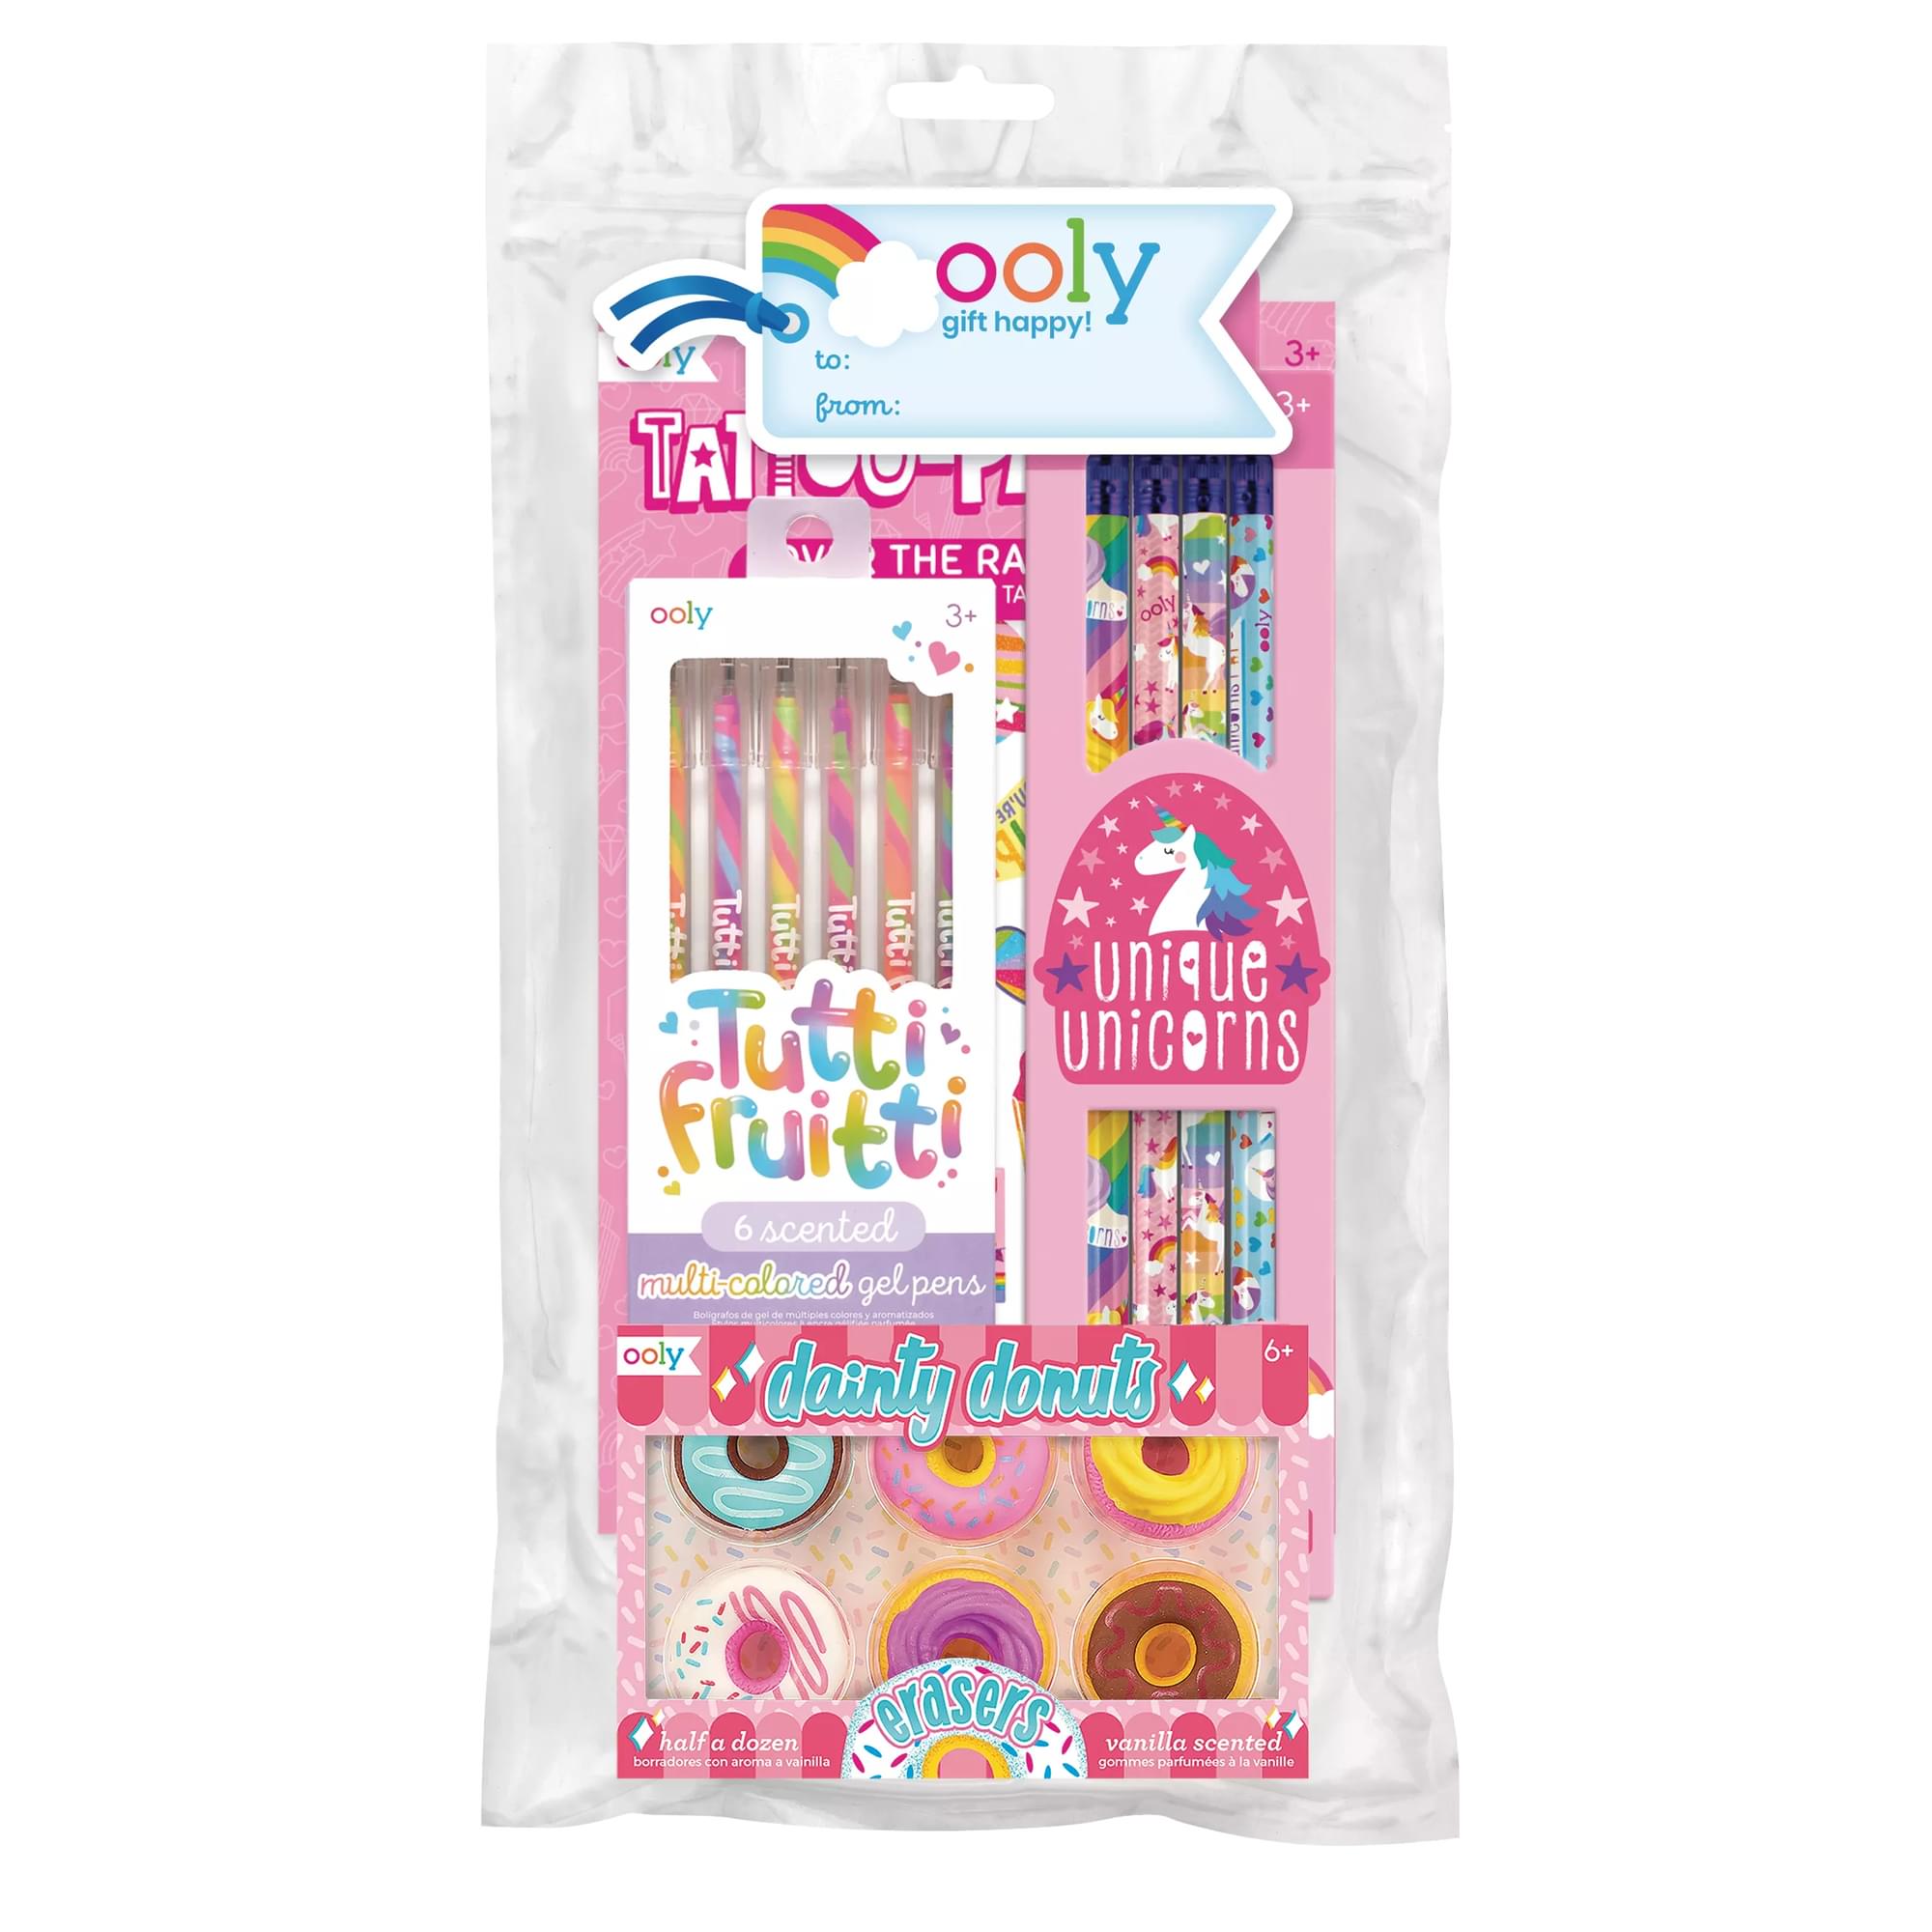 72 Pieces Valentine's Day Pencils for Kids Valentines Pencil Bulk Holiday Pencils with Top Erasers Pencils for Valentine's Day Gifts Party Favors